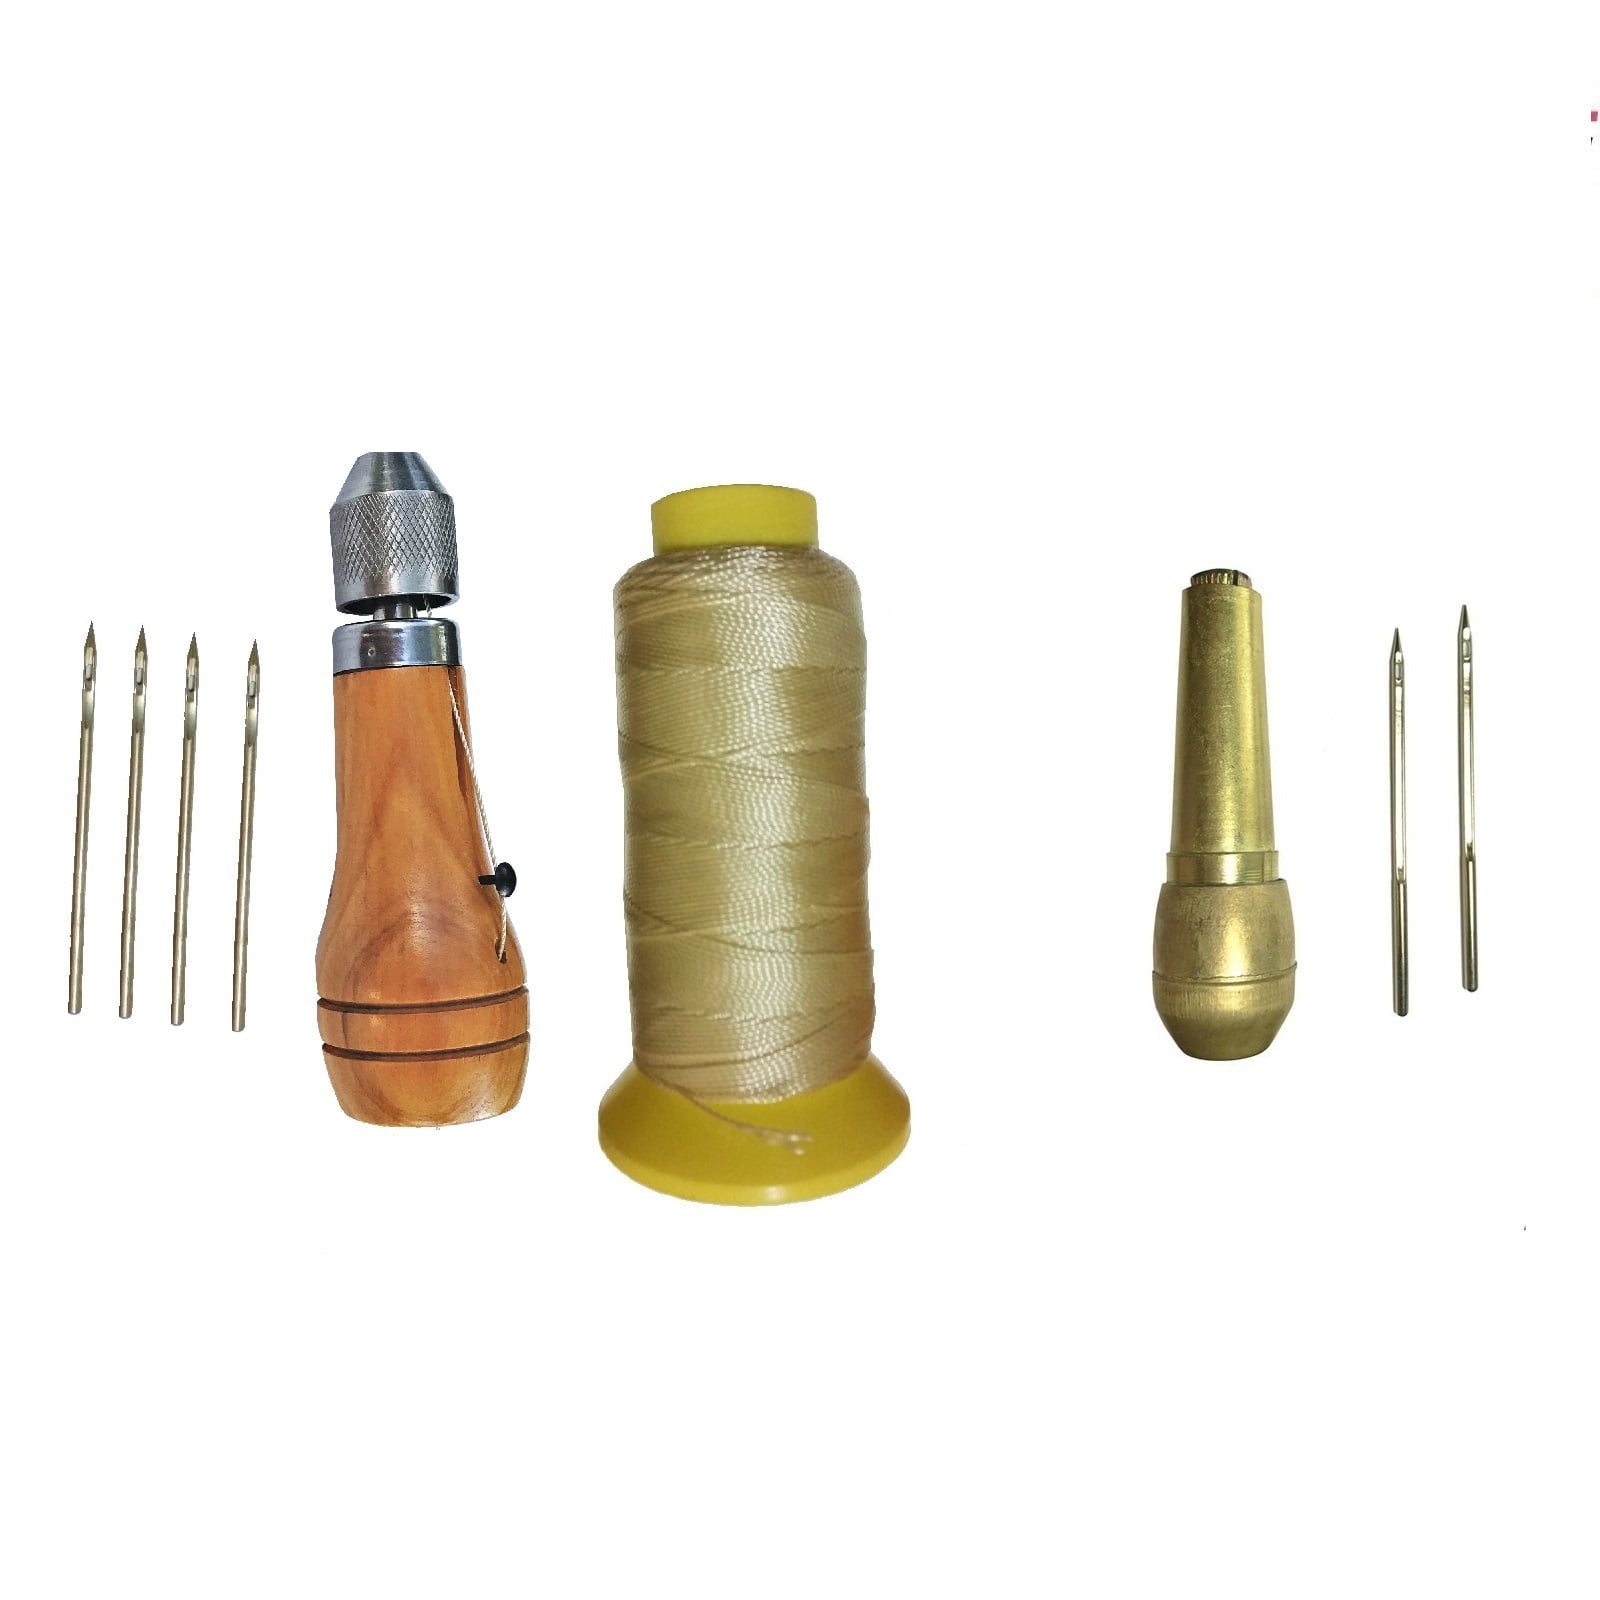 AIEX Upholstery Repair Kit Leather Hand Sewing Craft Tools with Needles,  Thread, Drilling Awls for Leather Canvas Sewing (18)